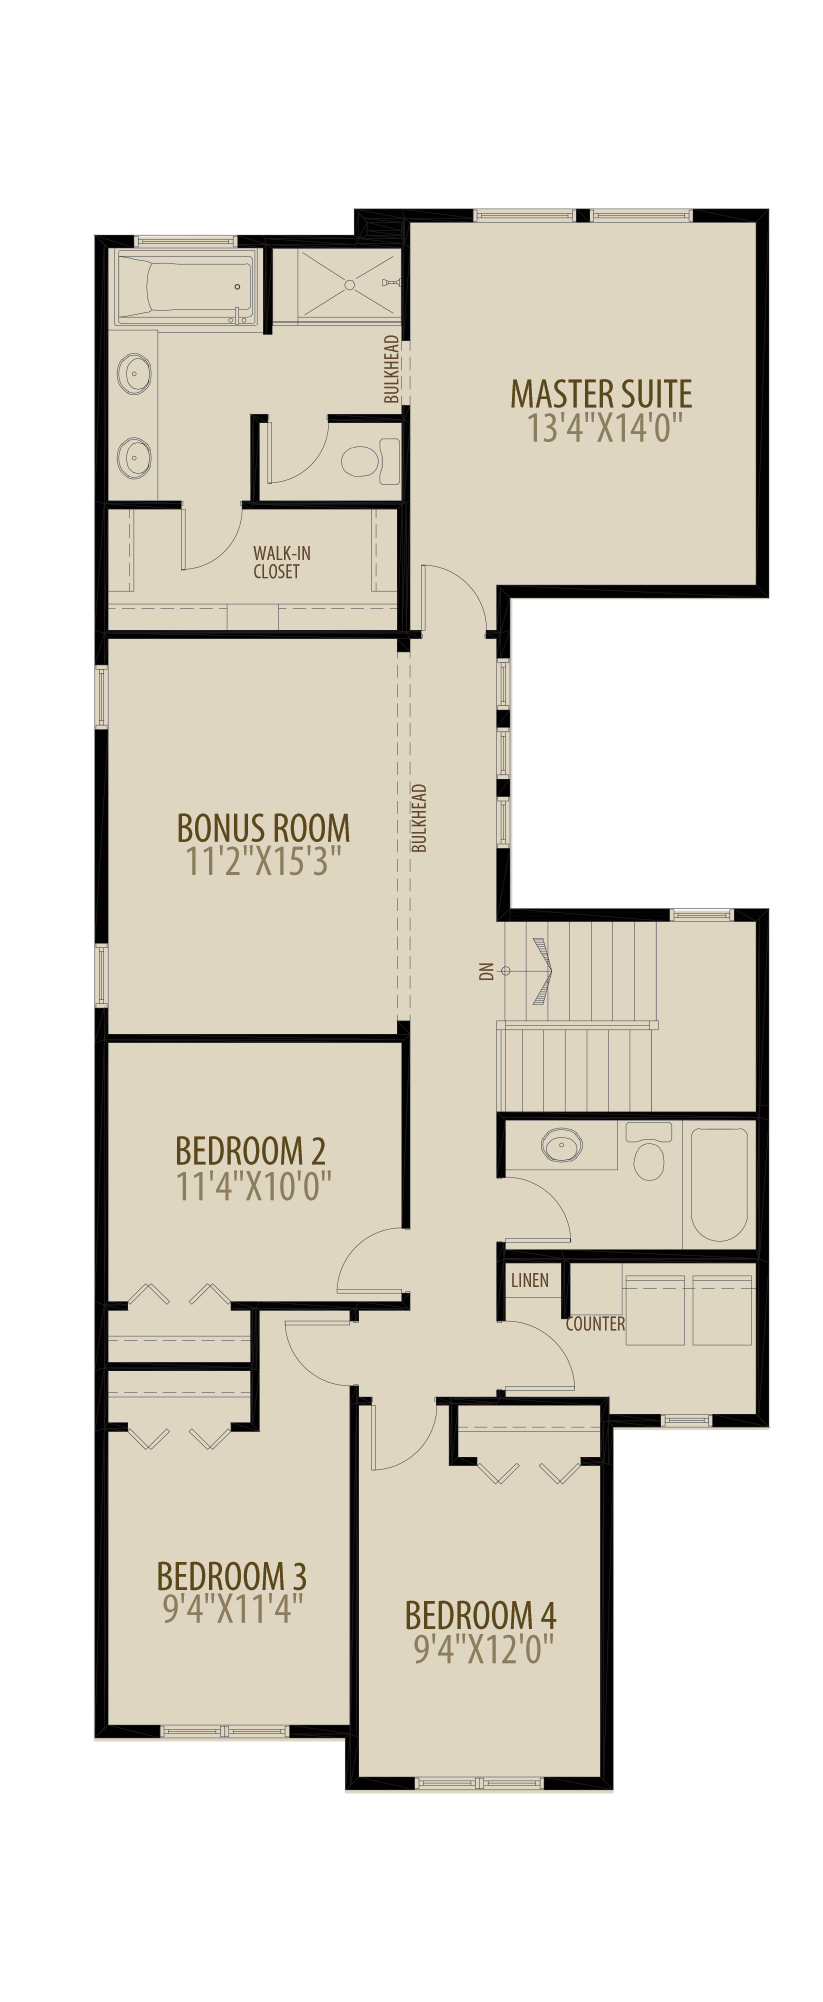 Optional 4th Bedroom adds 132 sq ft